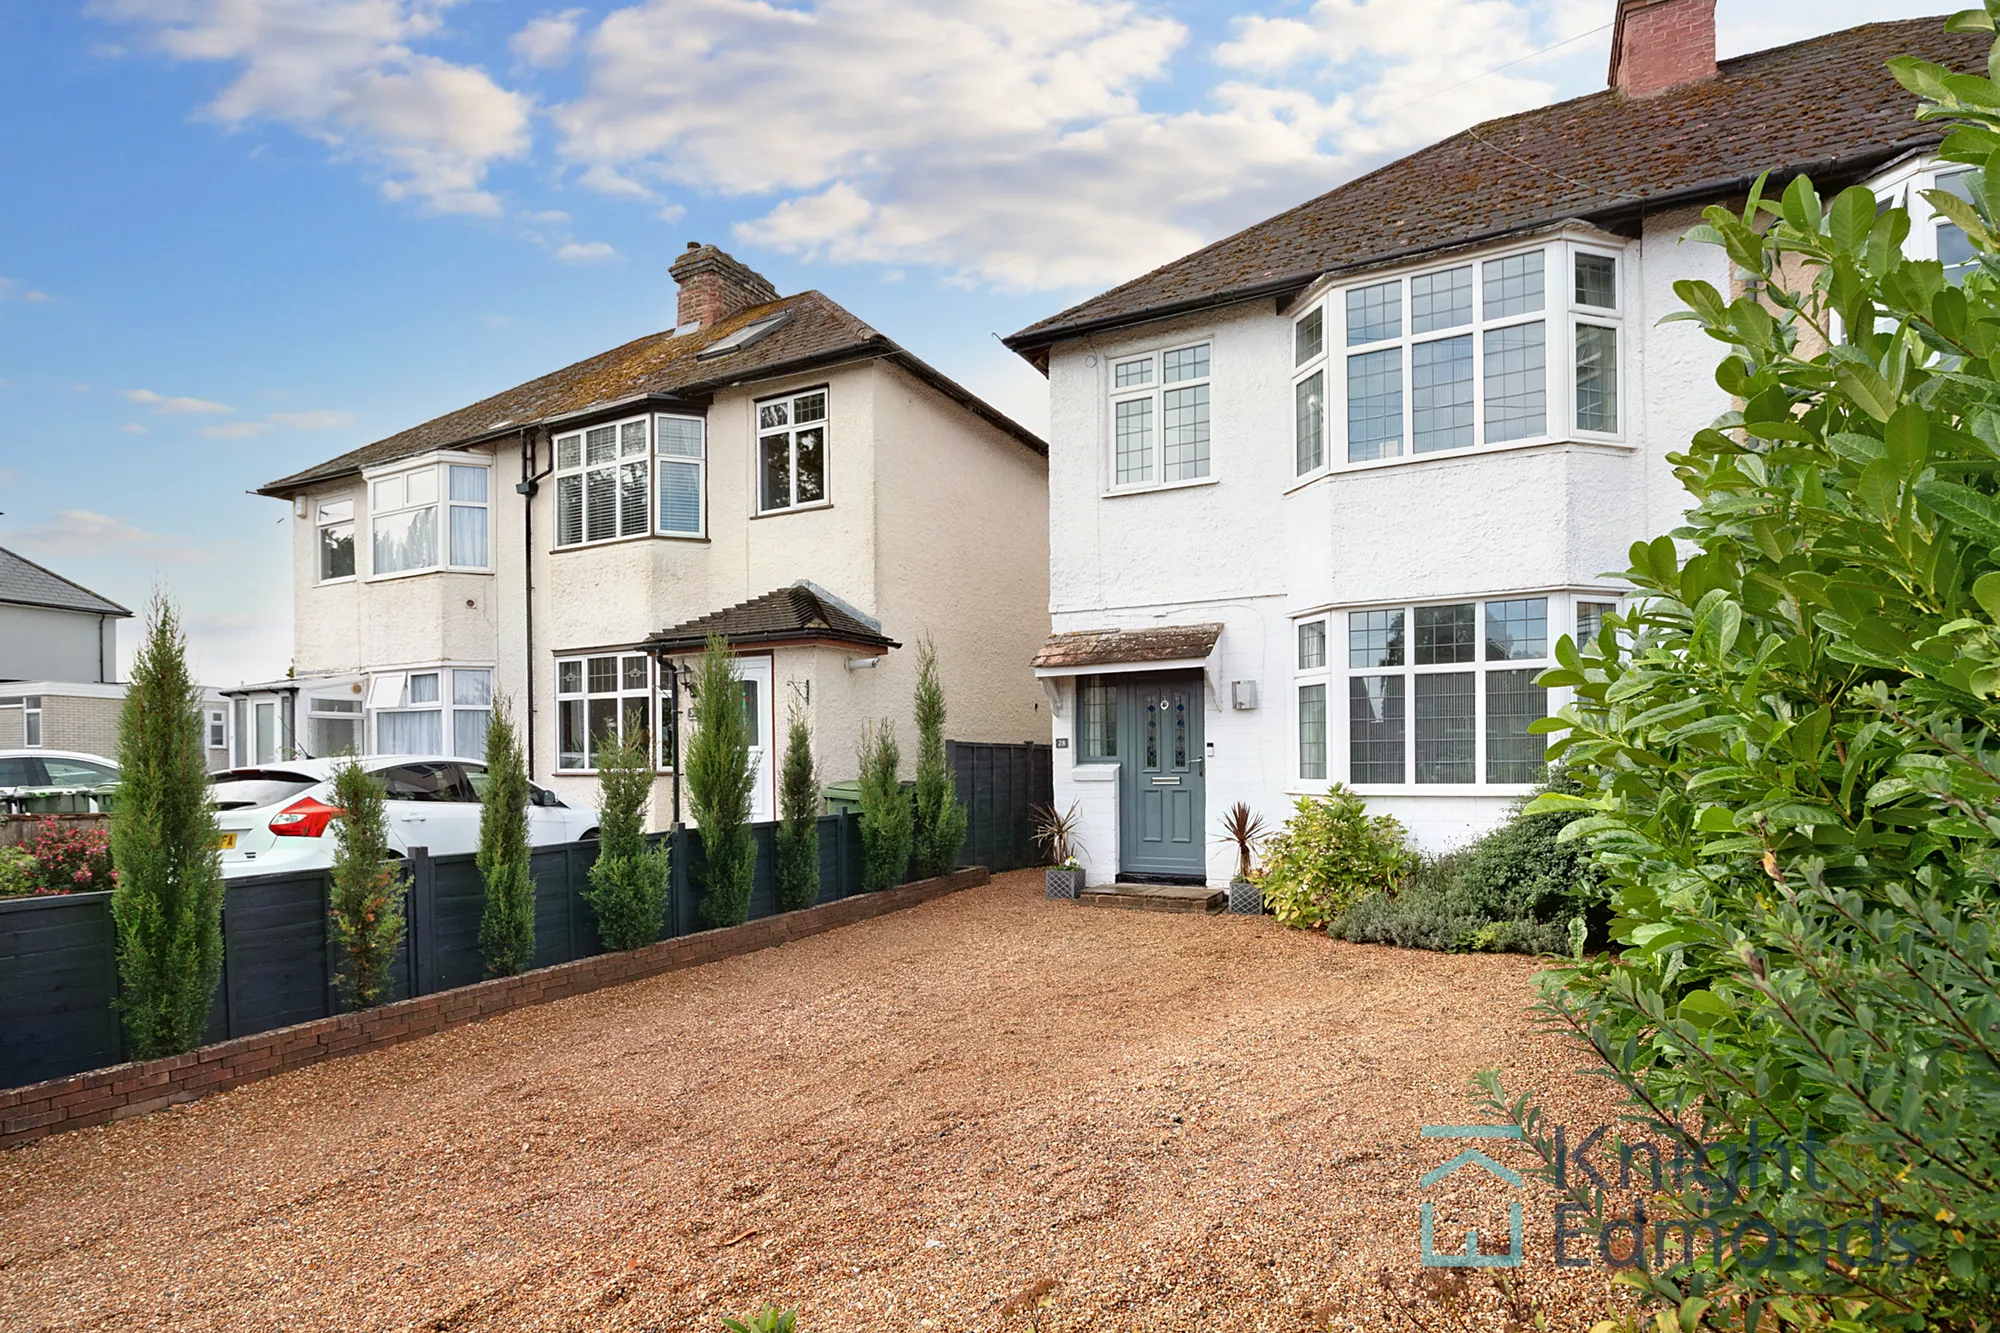 3 bed semi-detached house for sale in Sutton Road, Maidstone, ME15